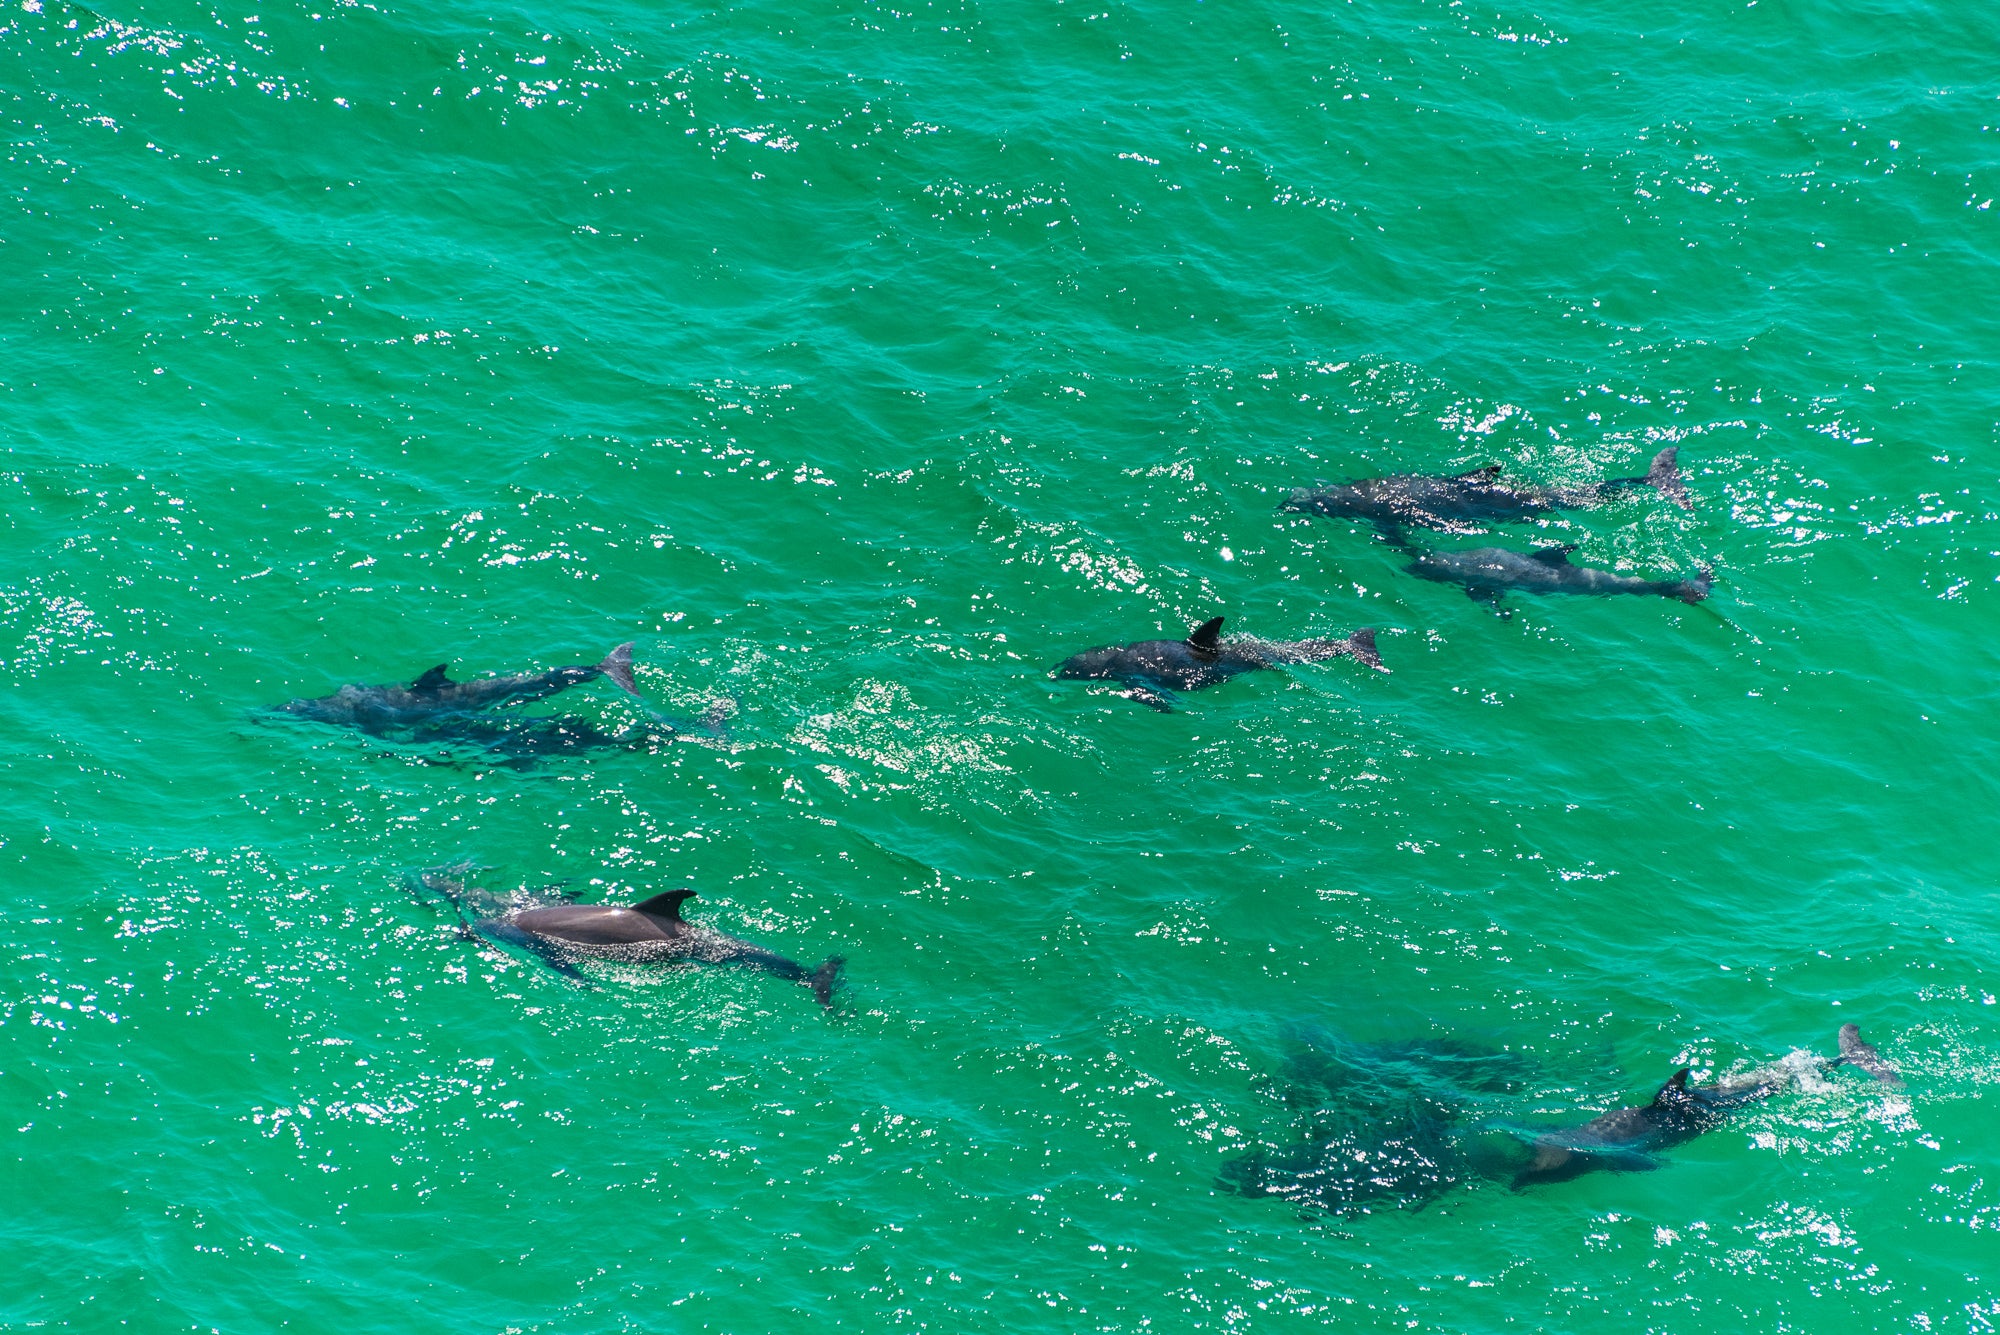 Dolphins+at+Play+in+our+Emerald+Waters